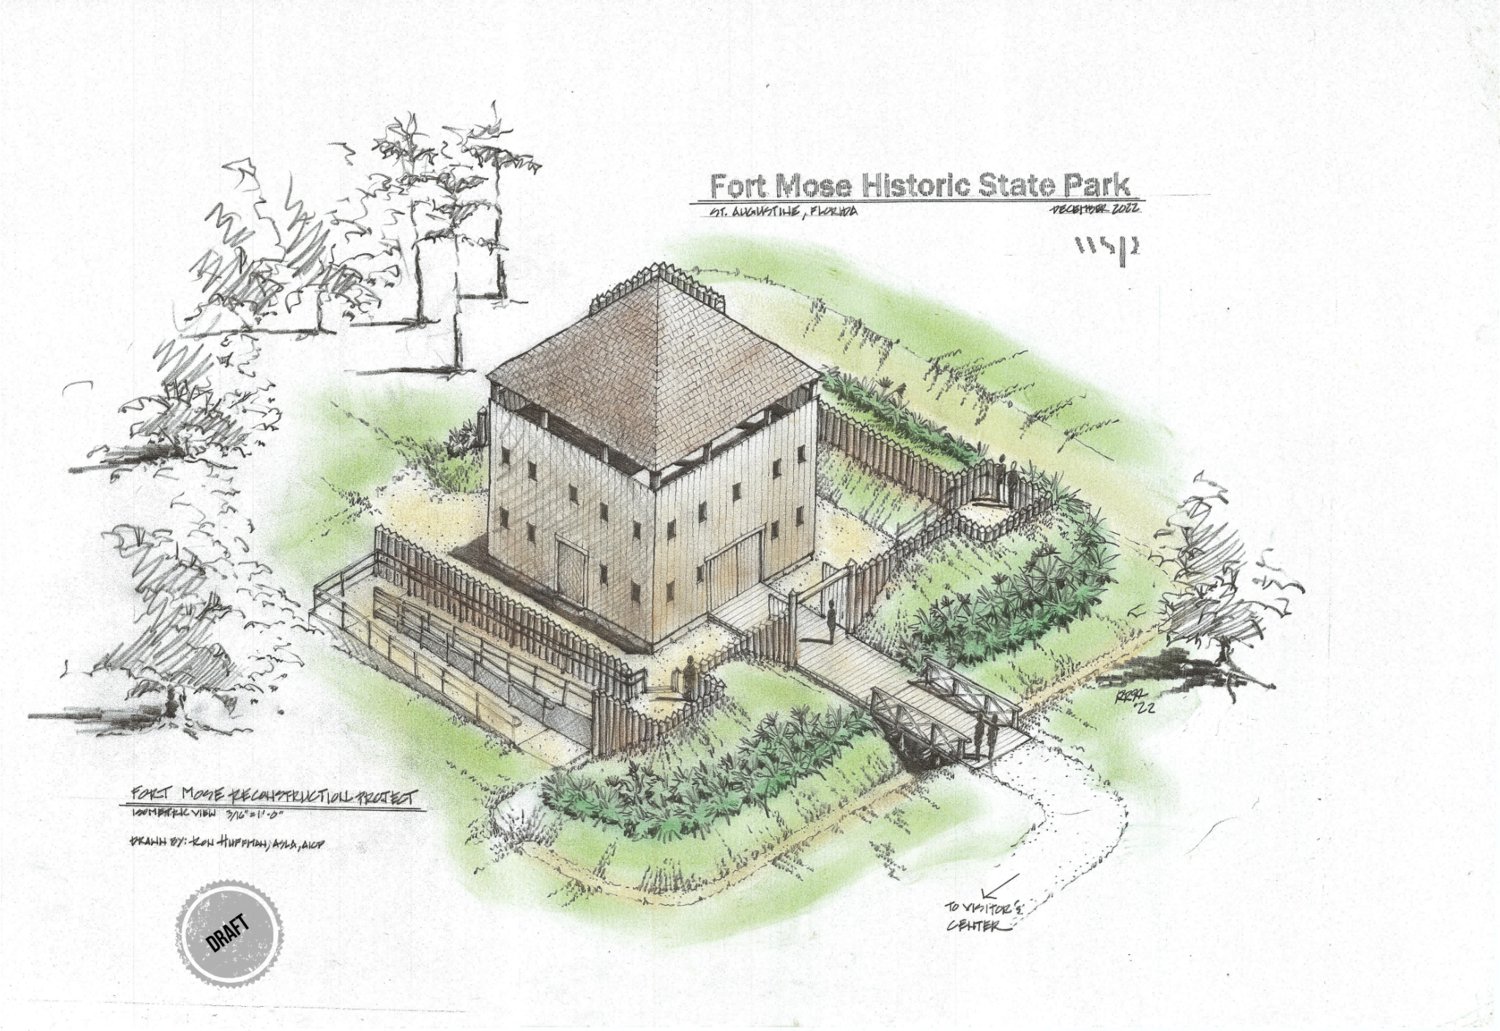 This rendering was recently released, showing plans for the reconstruction of Fort Mose.